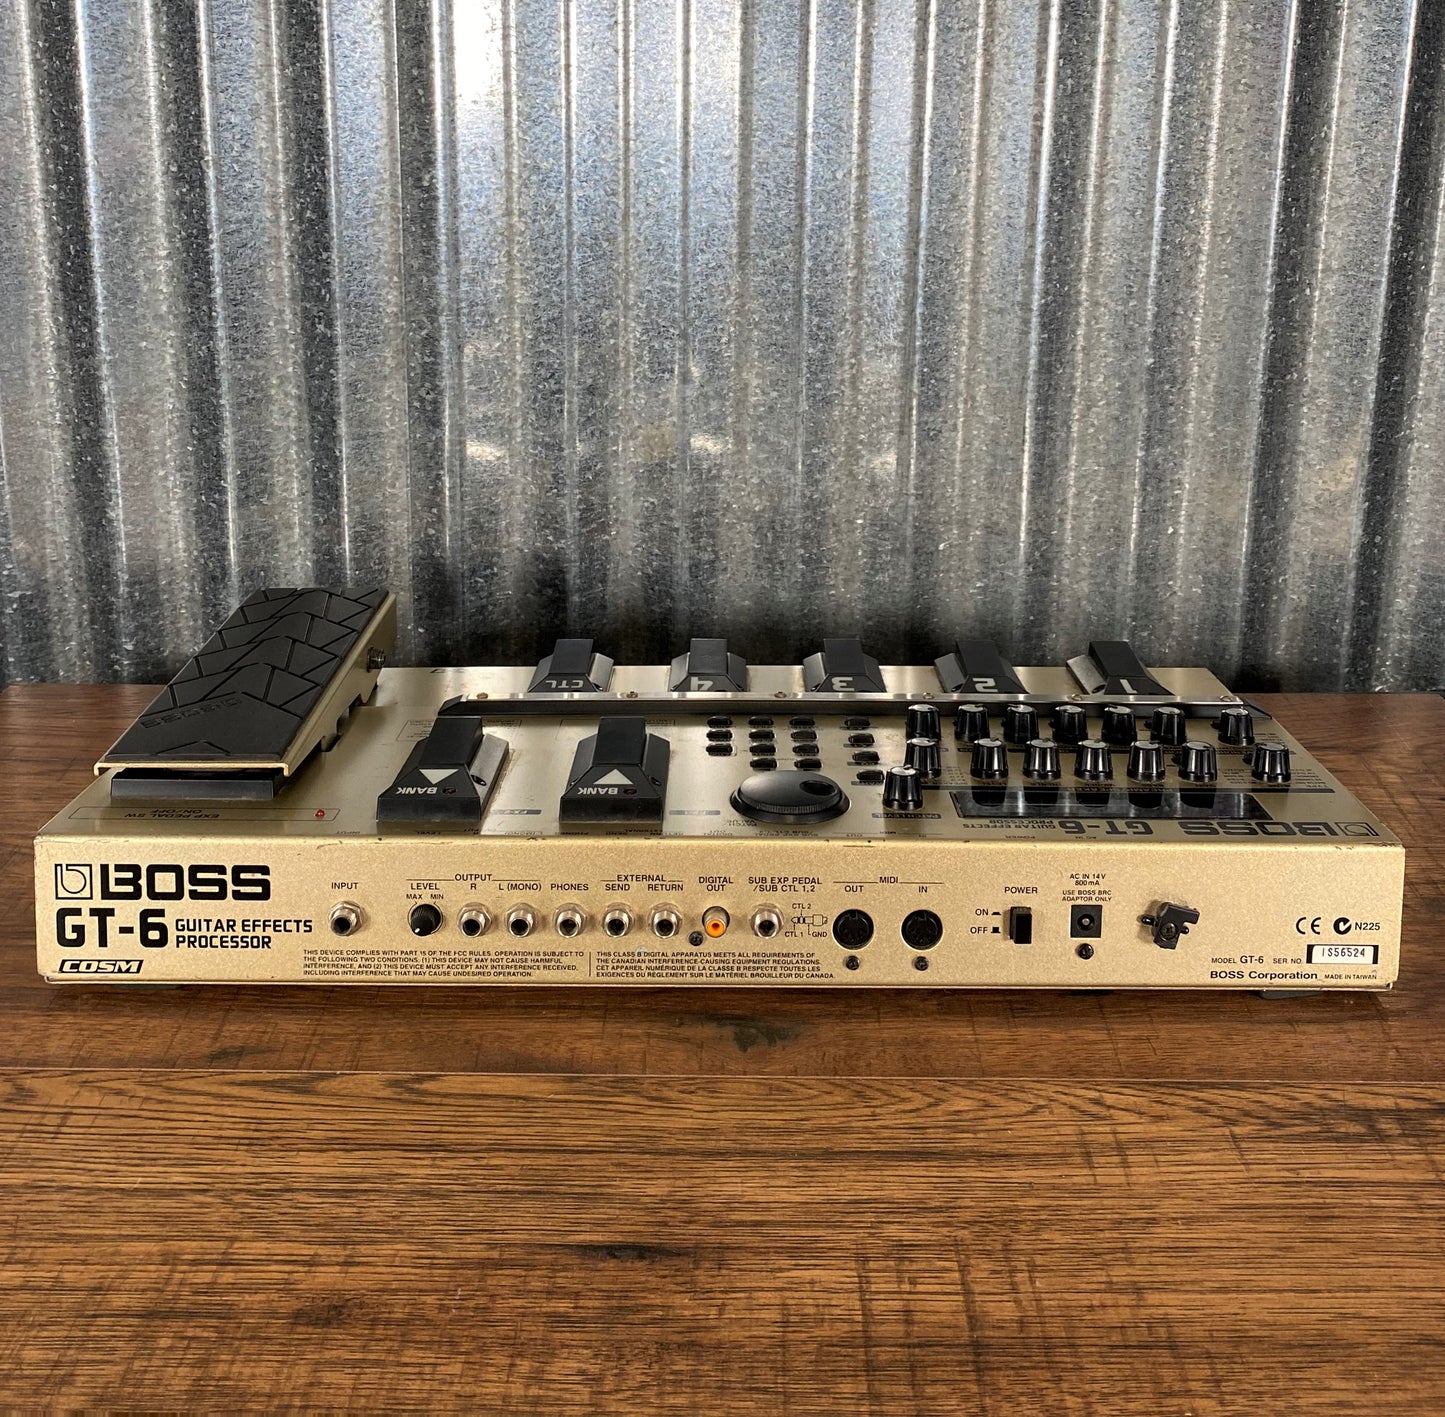 Boss GT-6 Multi Effect Processor Guitar Effects Pedal Used